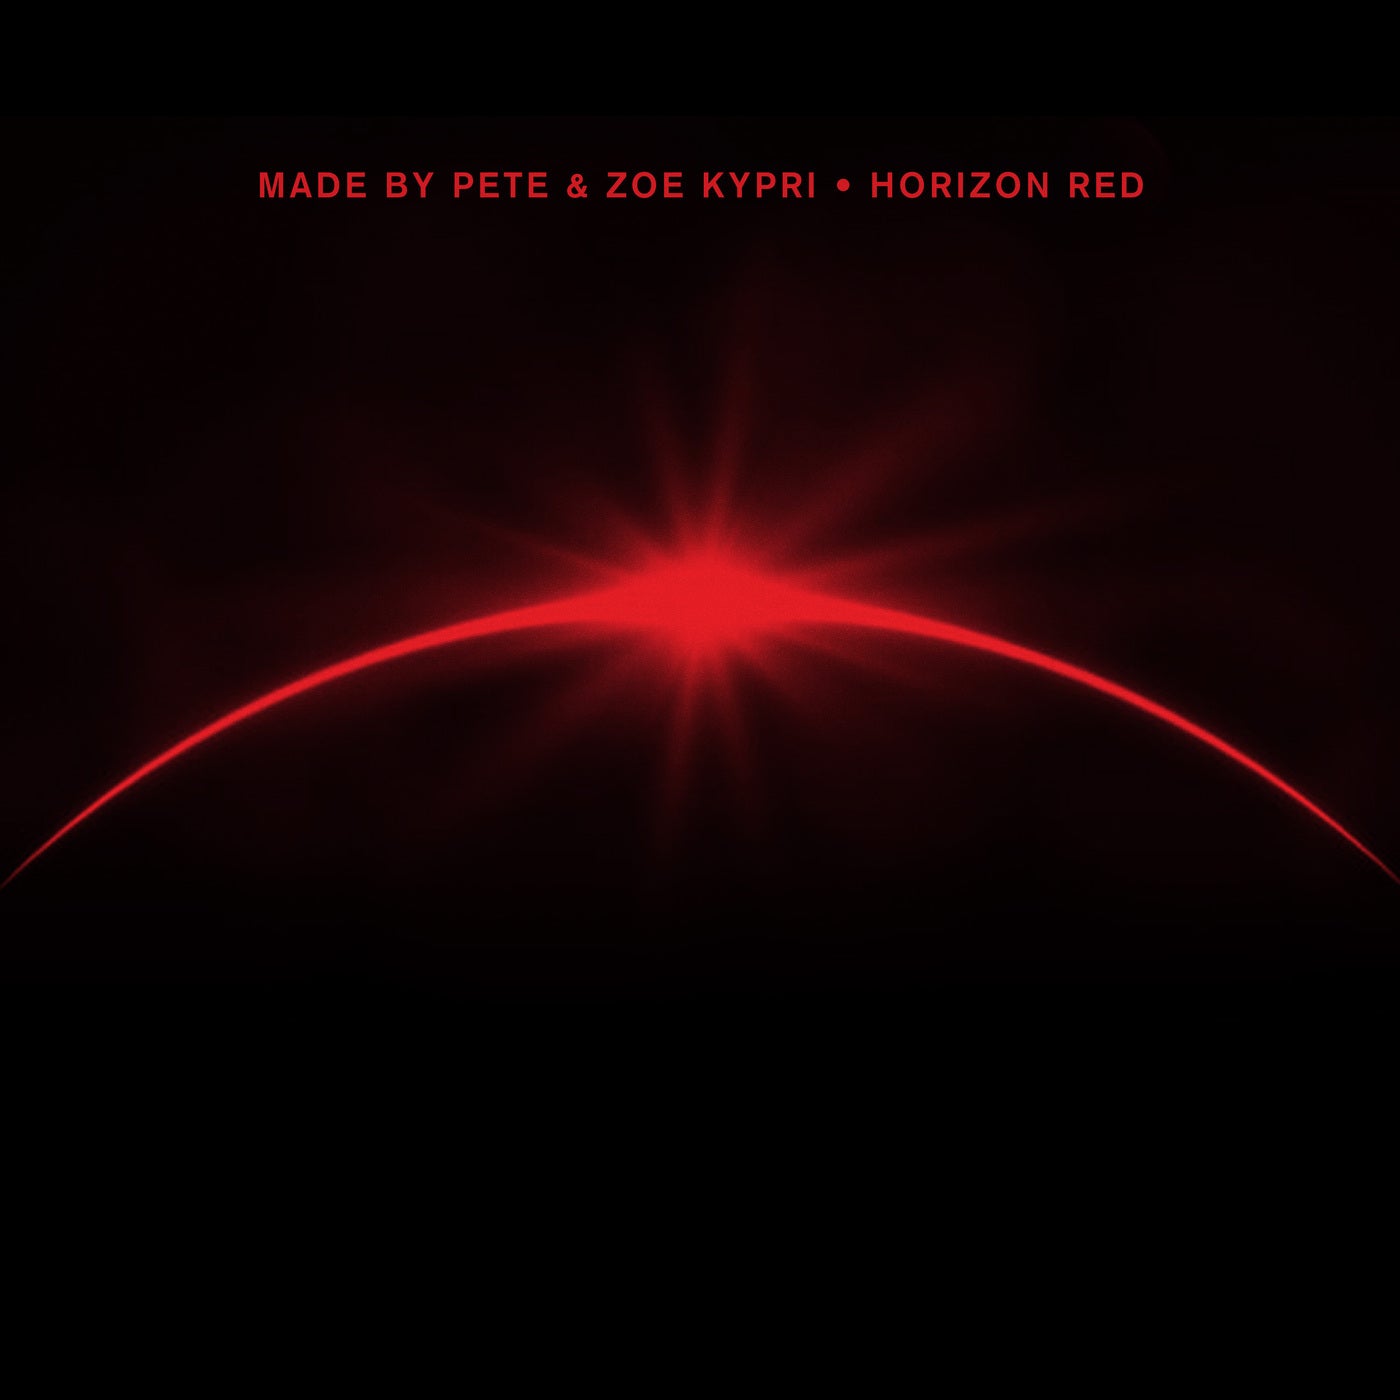 Made By Pete & Zoe Kypri - Horizon Red (Extended)